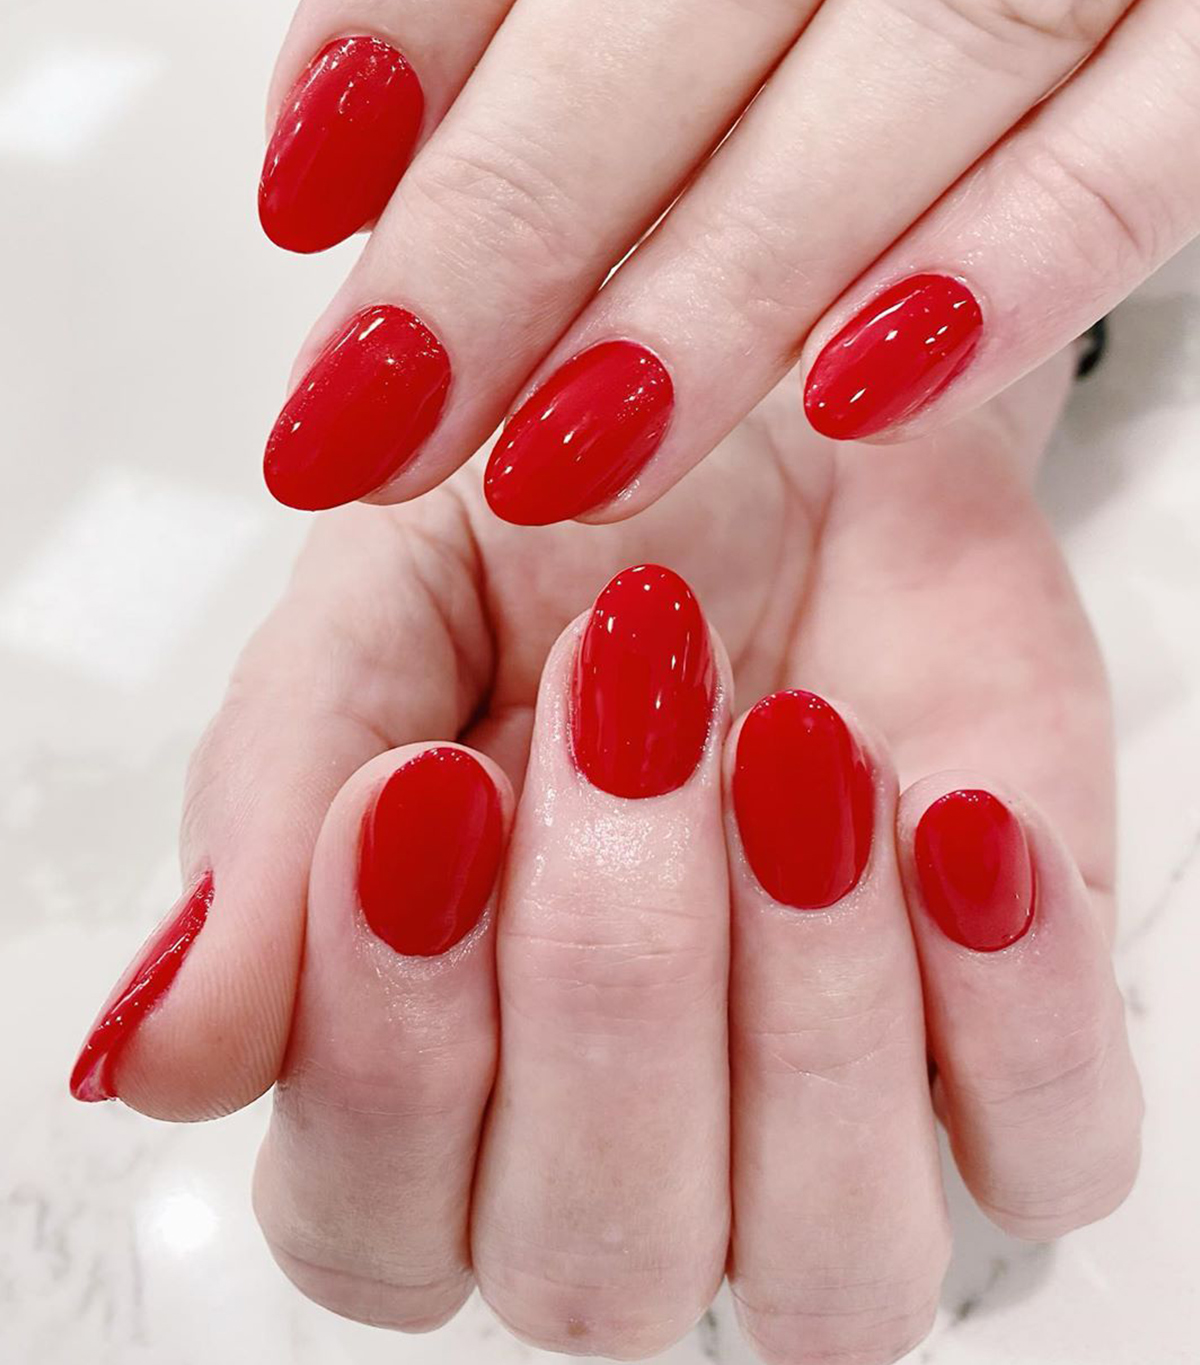 The 15 Best Manicure Ideas for New Year's Eve 2020: Red Nails